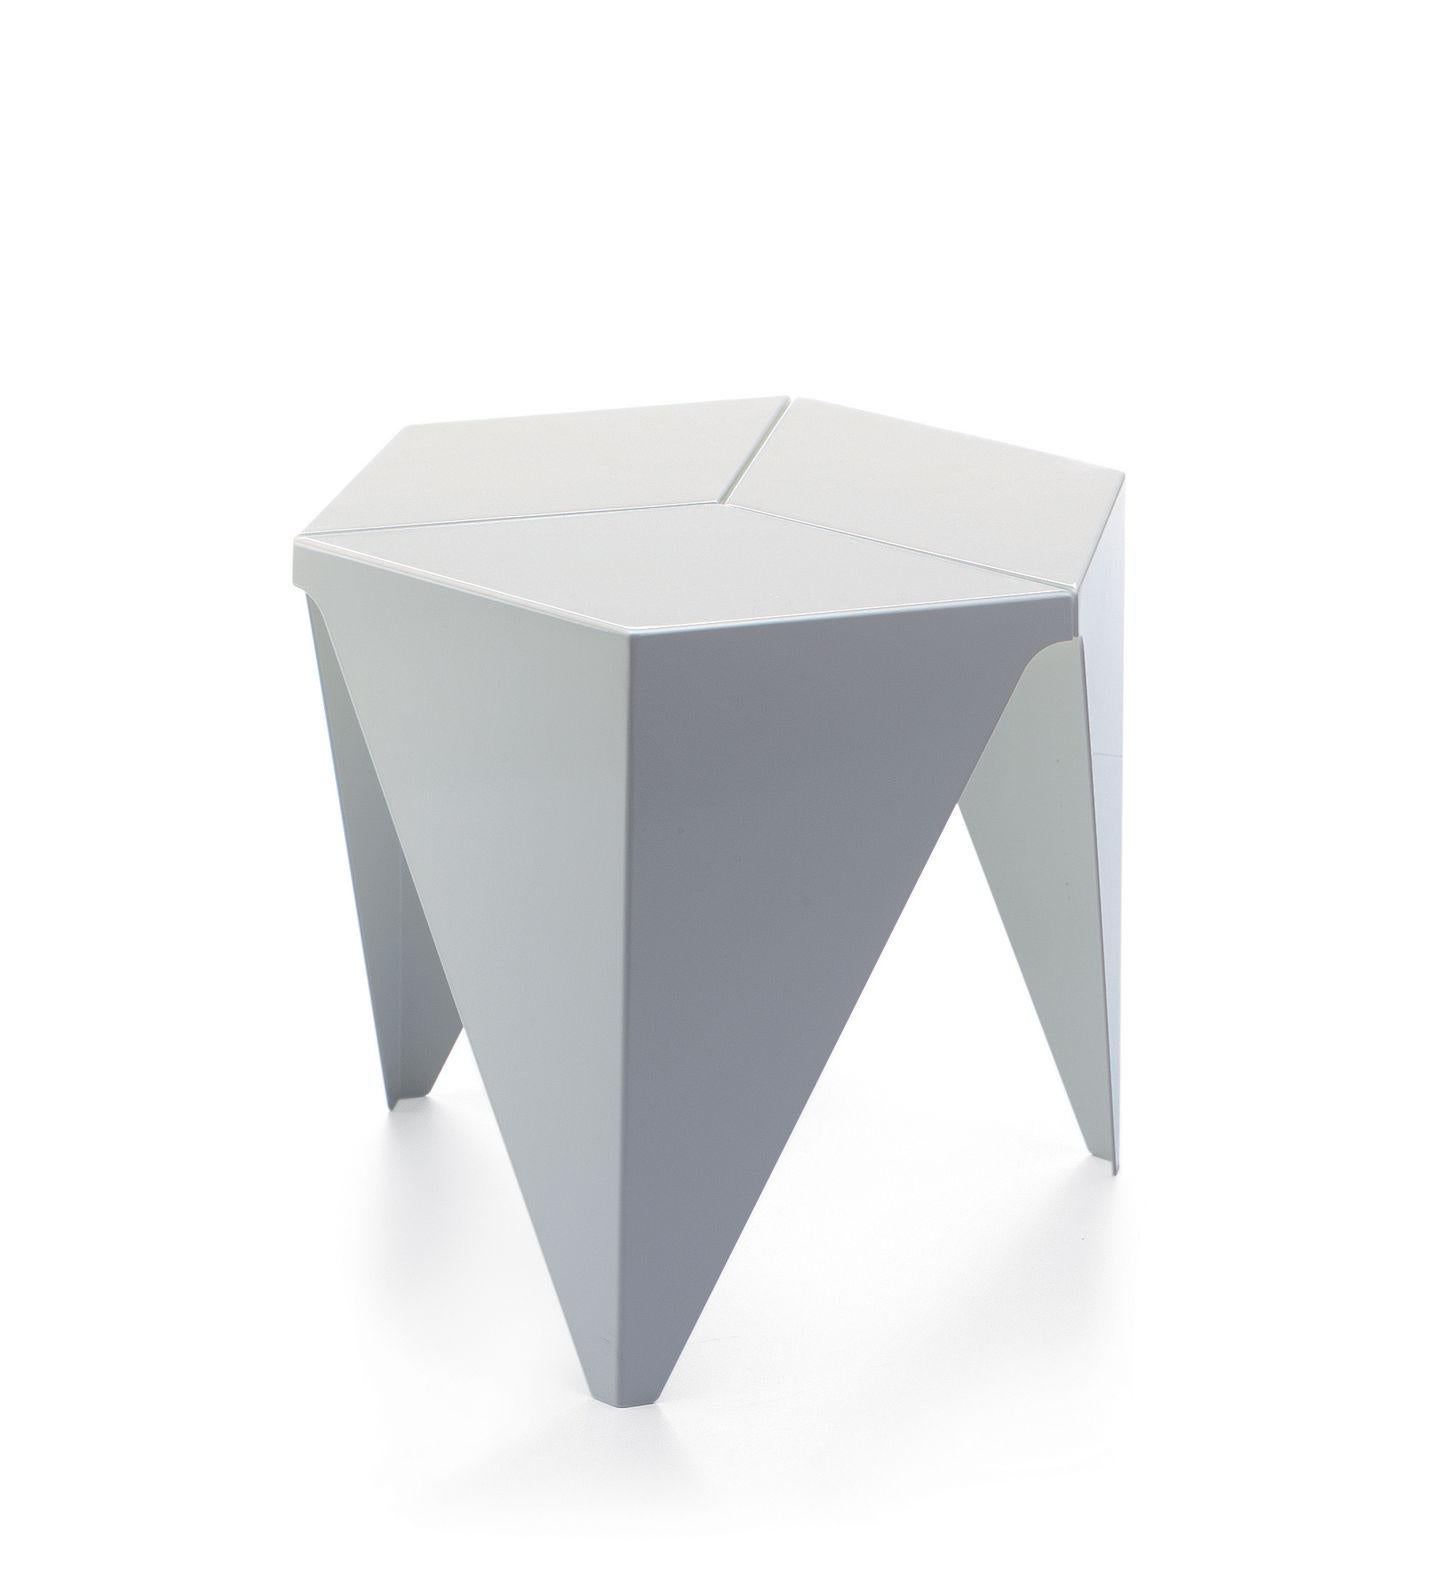 Side table designed by Isamu Noguchi in 1957.
Manufactured by Vitra, Switzerland.

The Prismatic table by Isamu Noguchi was inspired by geometric forms and traditional Japanese paper folding techniques. This small, practical side table is